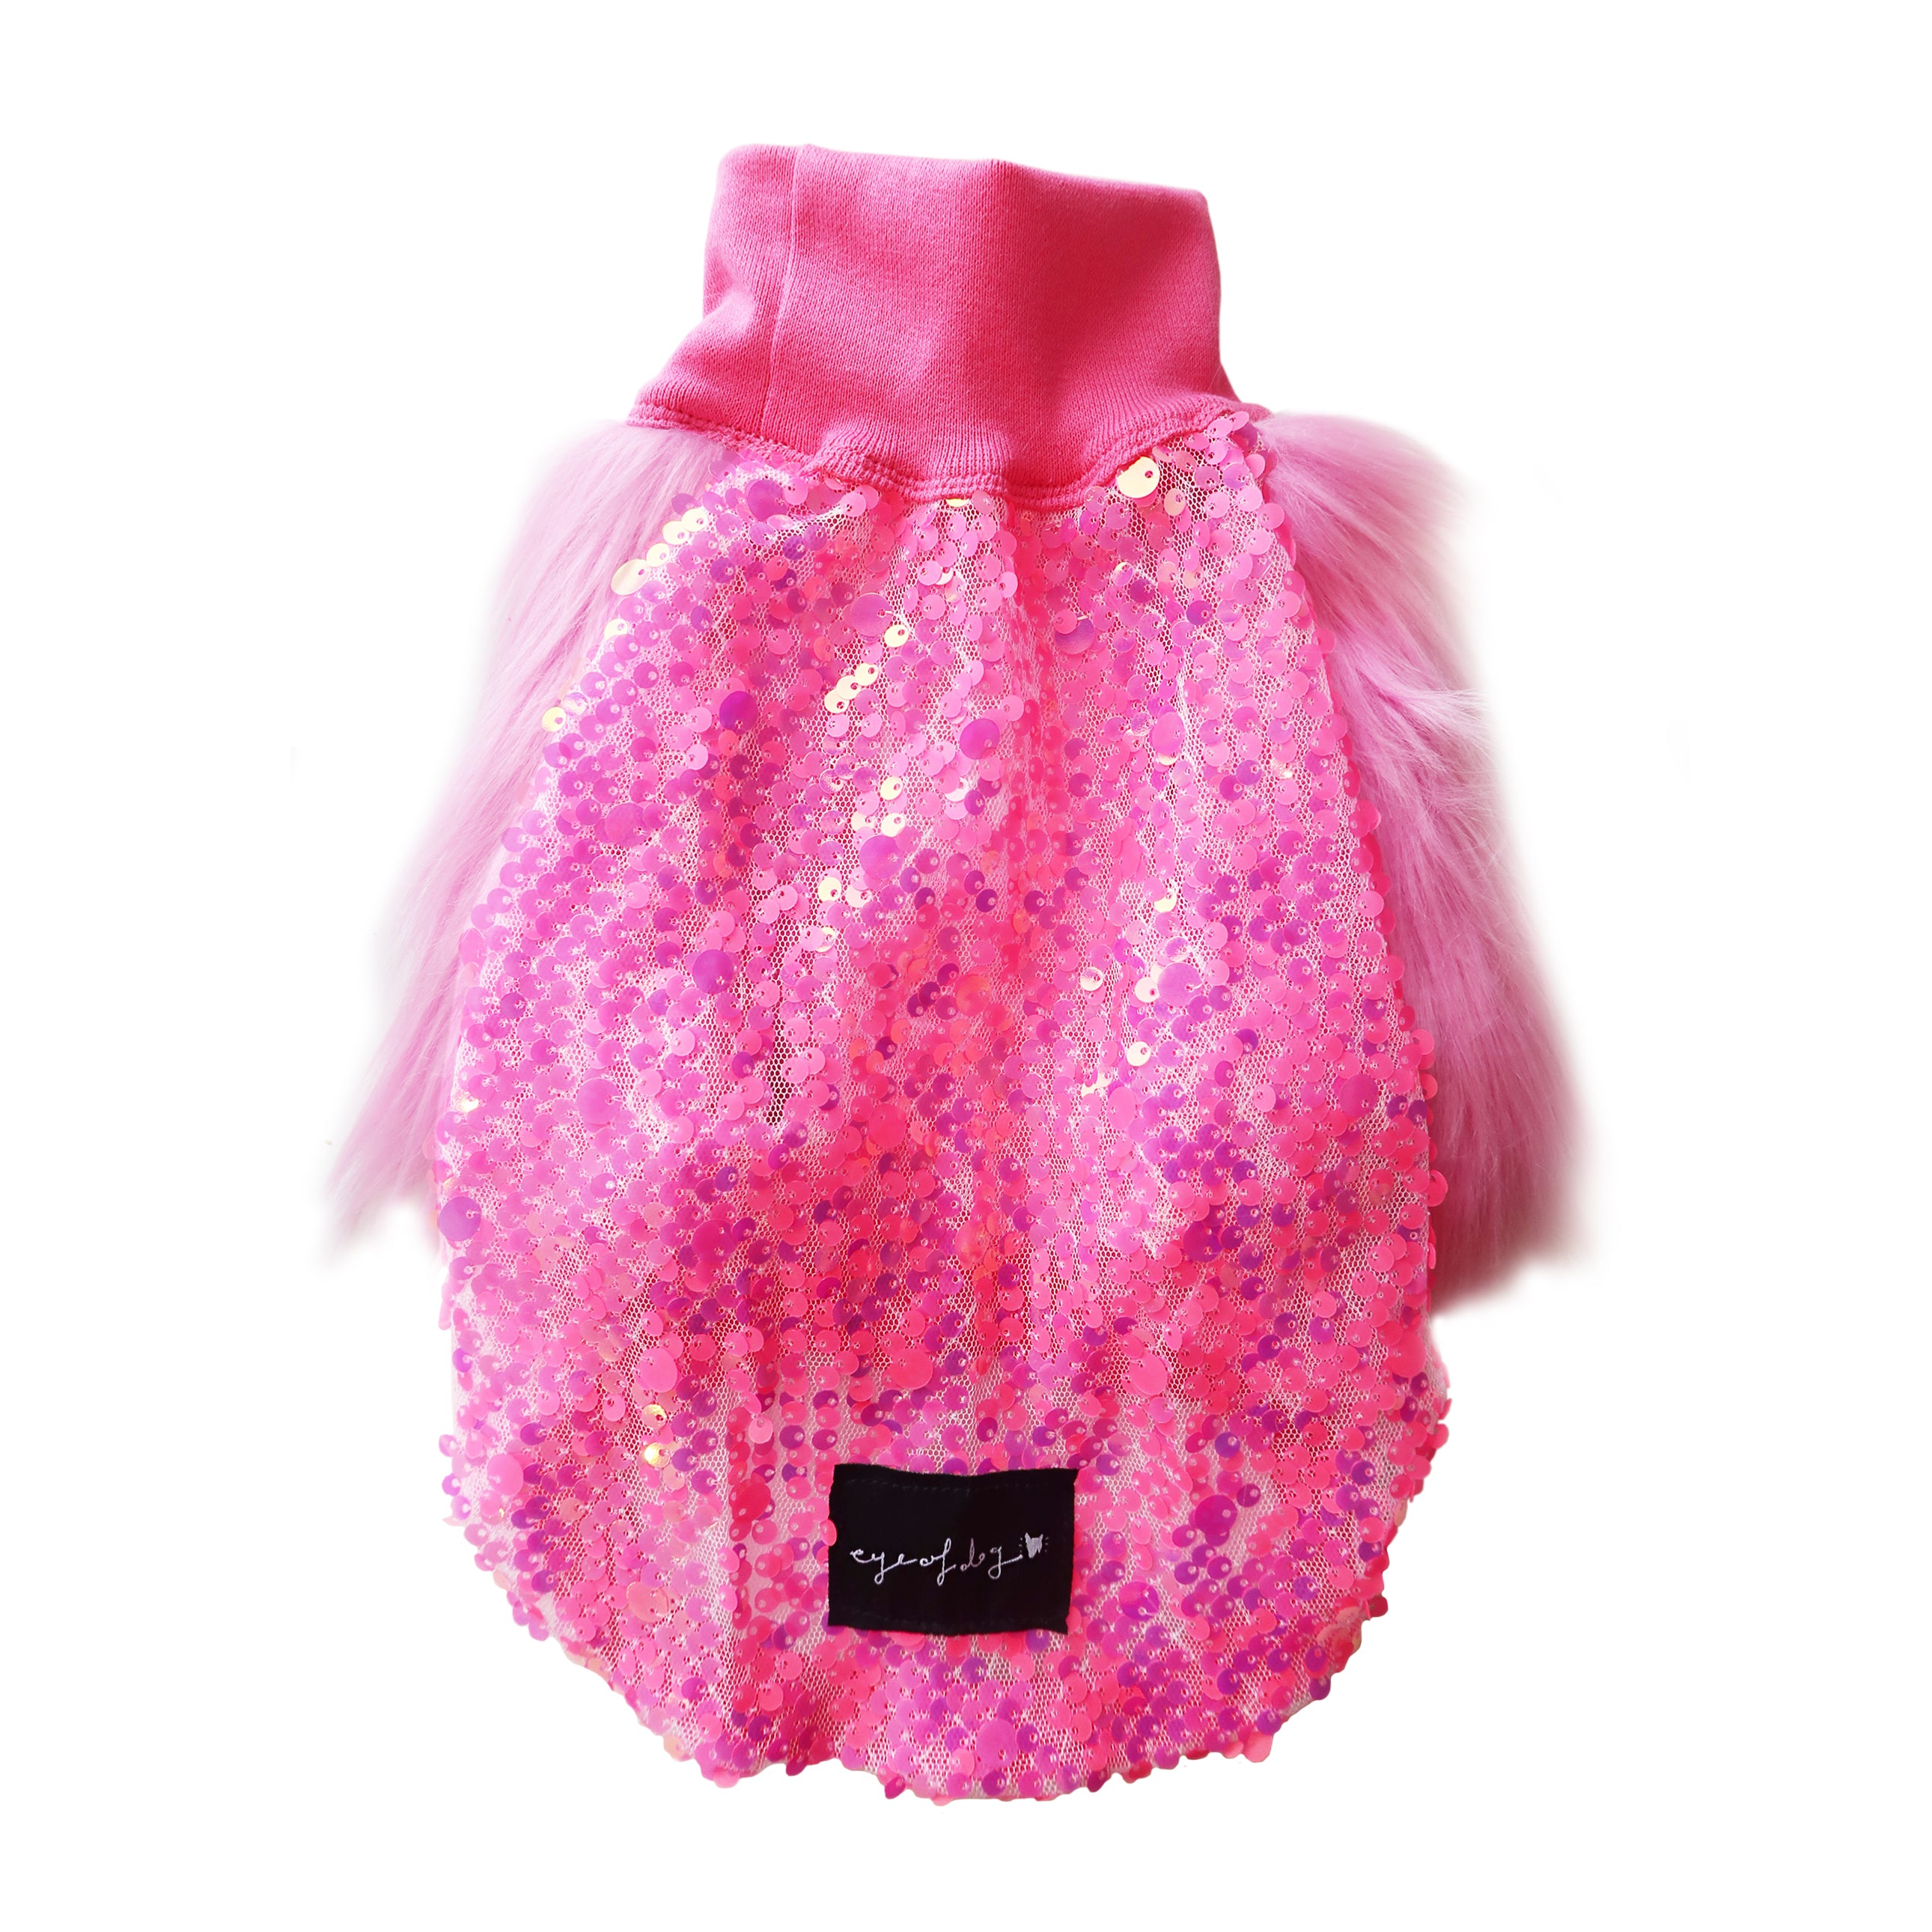 Limited Edition- Party Pink sequin Faux fur dog top - Only XS left - Not restocking.